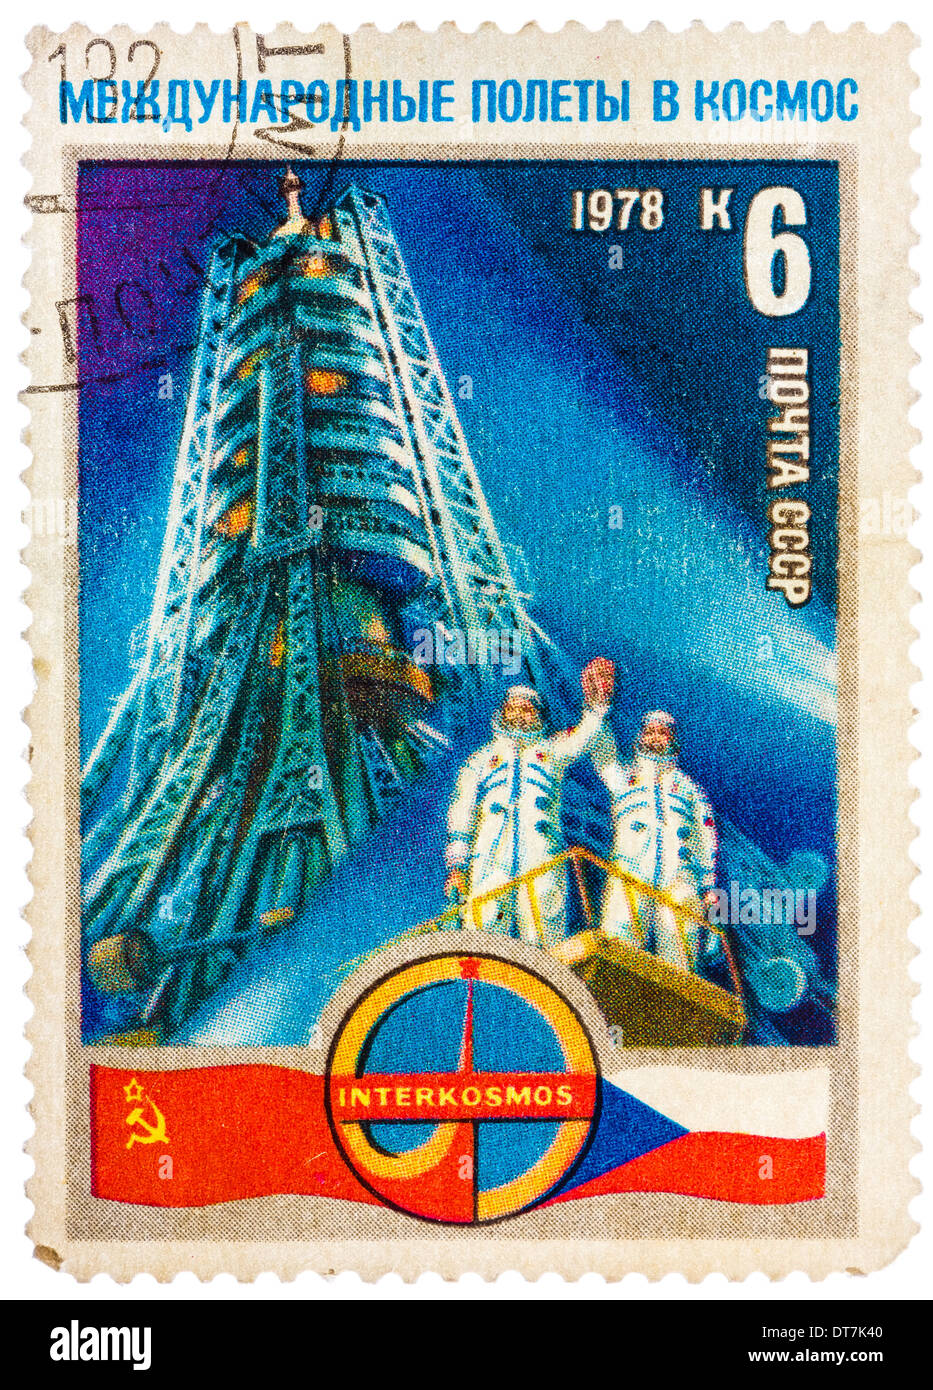 stamp printed in The Soviet Union devoted to the international partnership between Soviet Union and Foreign countries in space Stock Photo